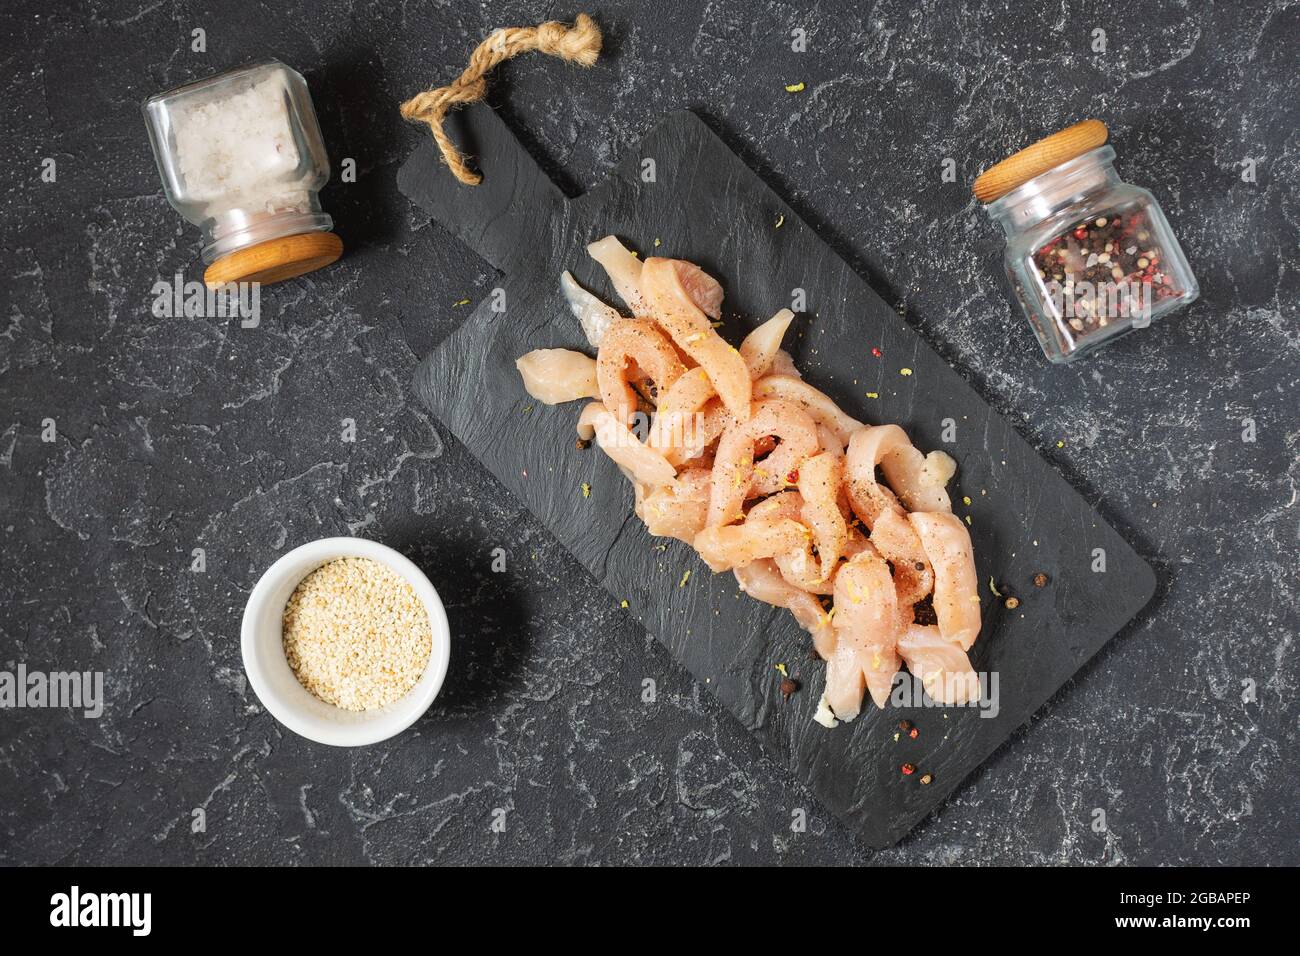 fresh raw chicken breast cut in strips for a goulash or stir fry seasoned with spice rub heaped on a black stone background. Top view Stock Photo